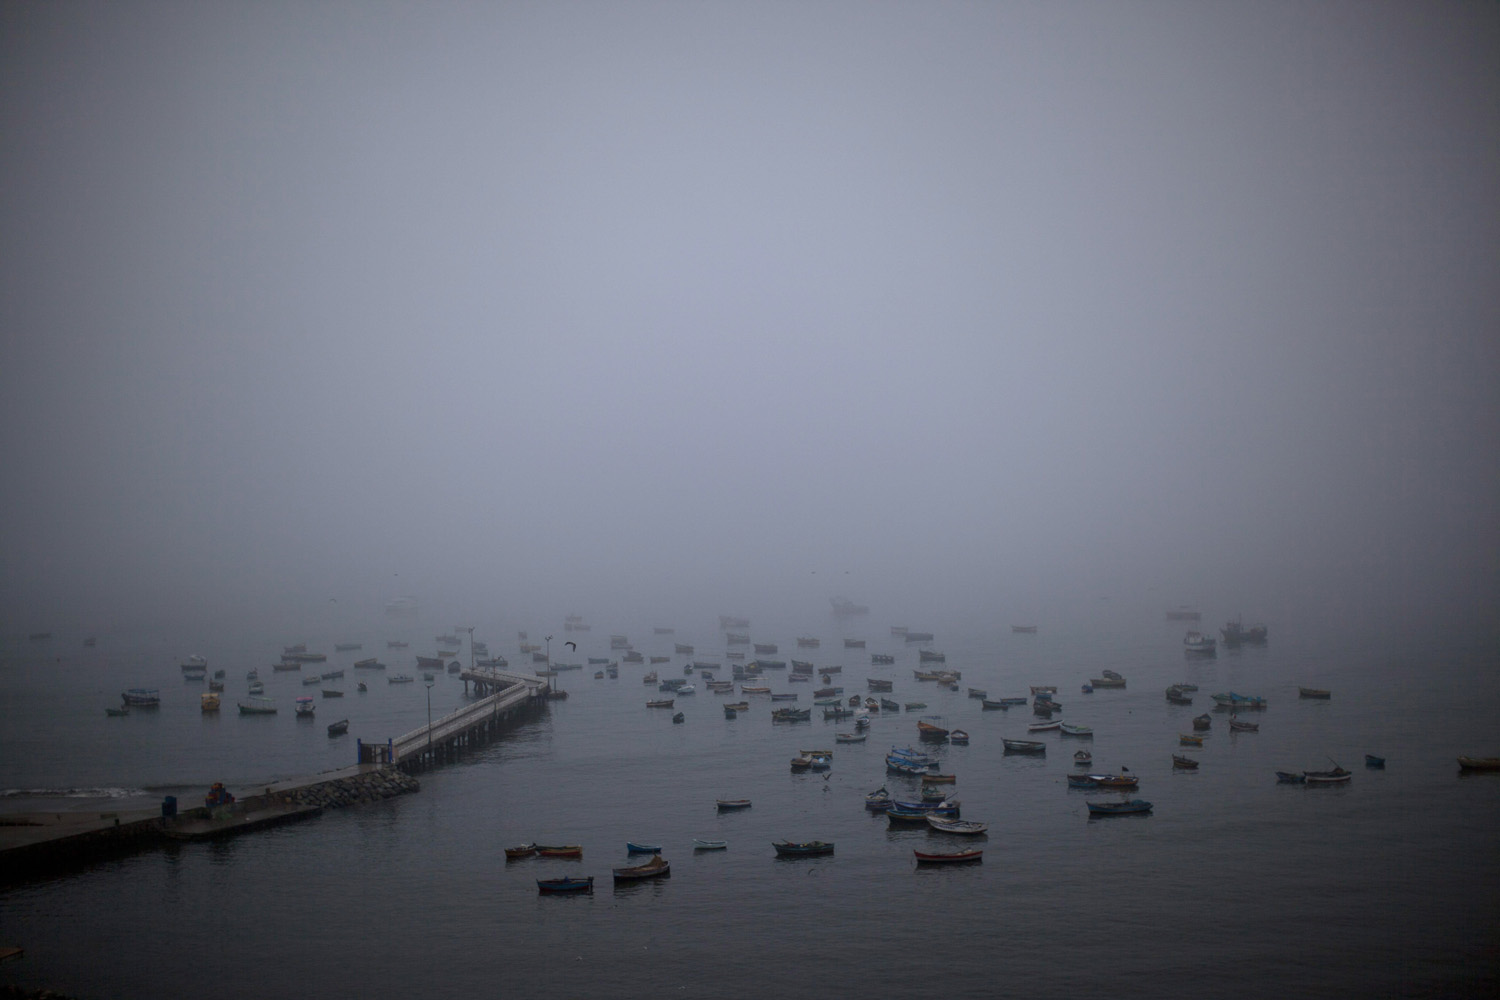 Apr. 2, 2014. Morning fog lifts at the Chorrillo dock in the Pacific Ocean, revealing small scale fishing boats in Lima, Peru.